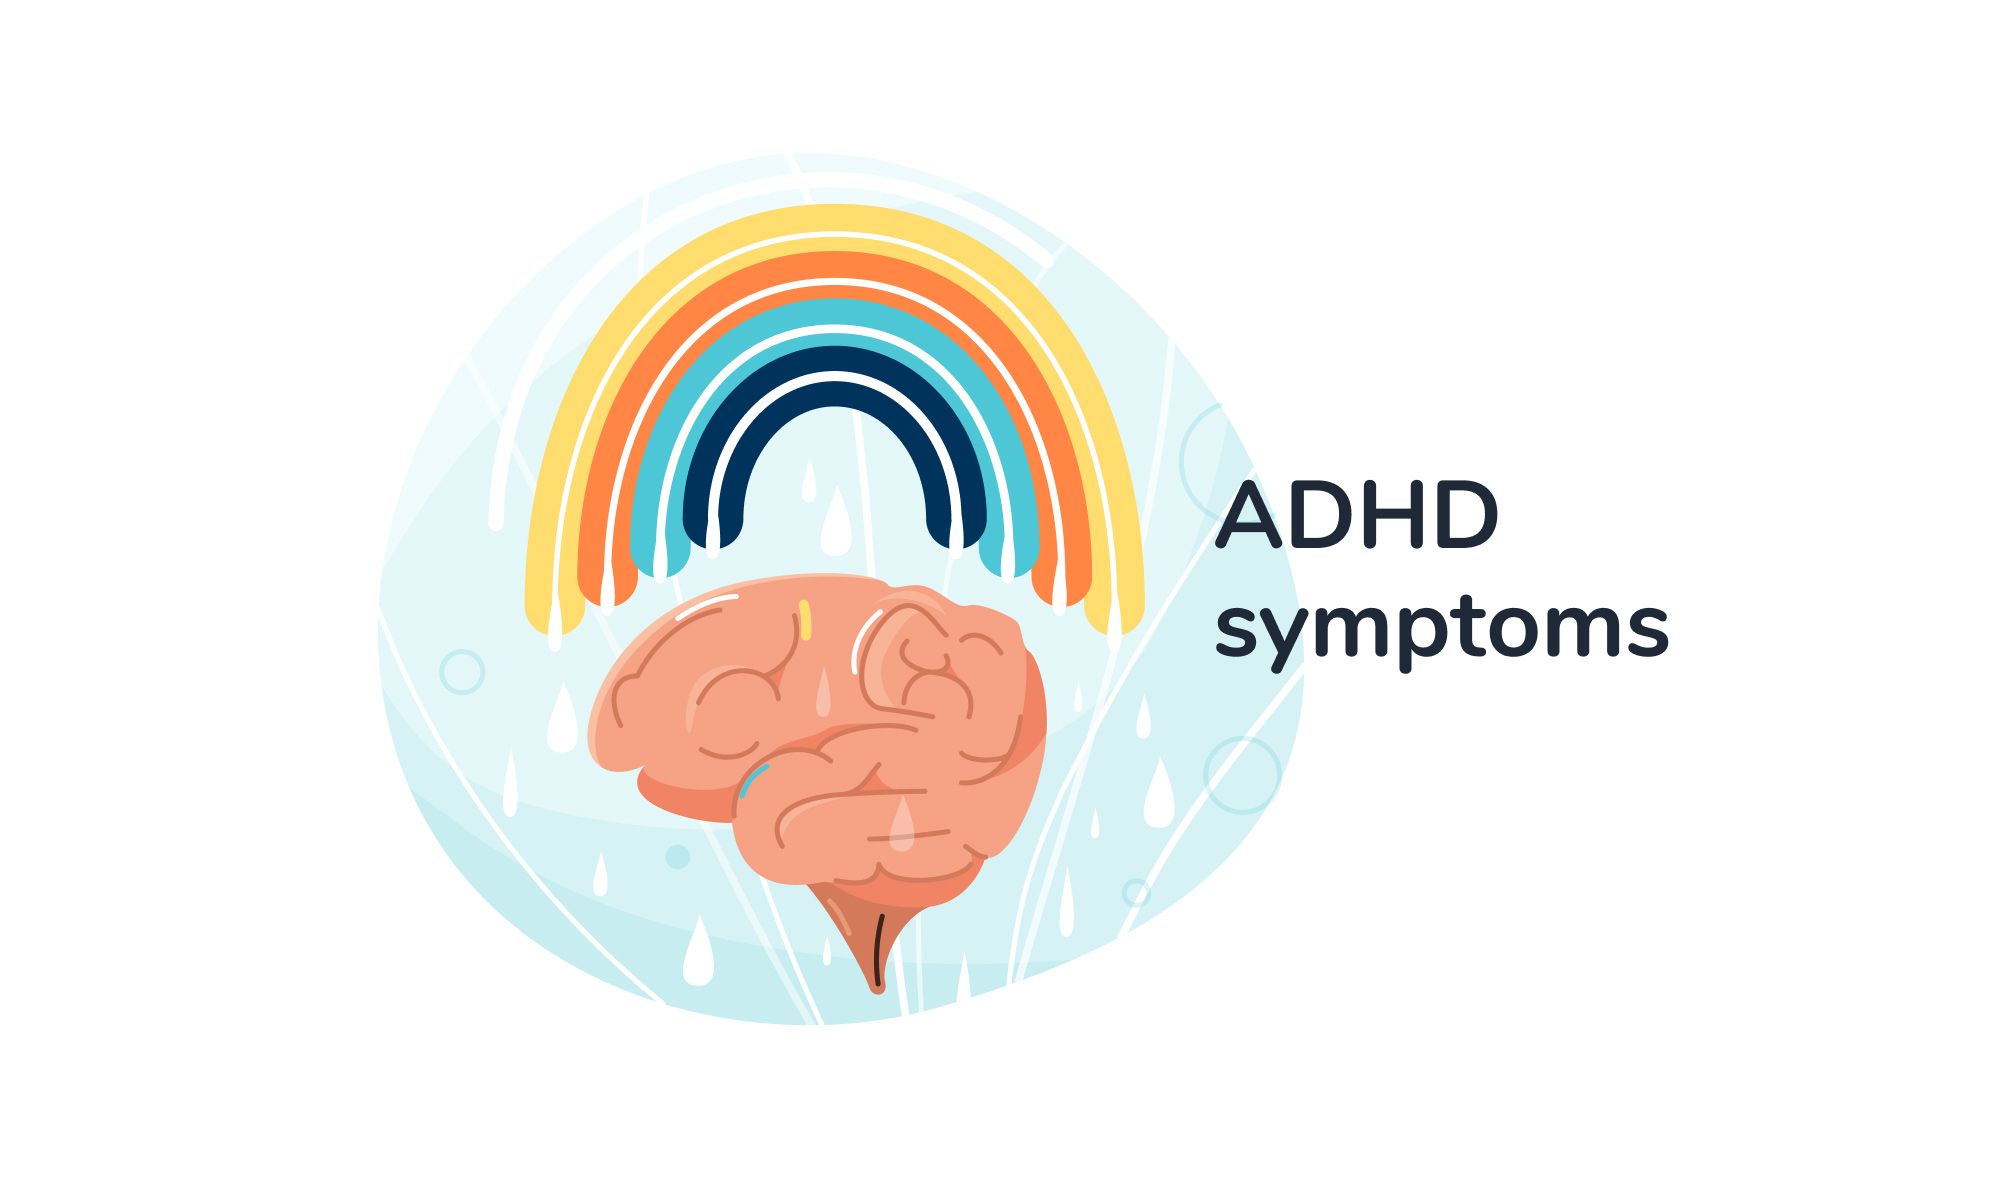 tools for adults with adhd - Explanation of ADHD symptoms